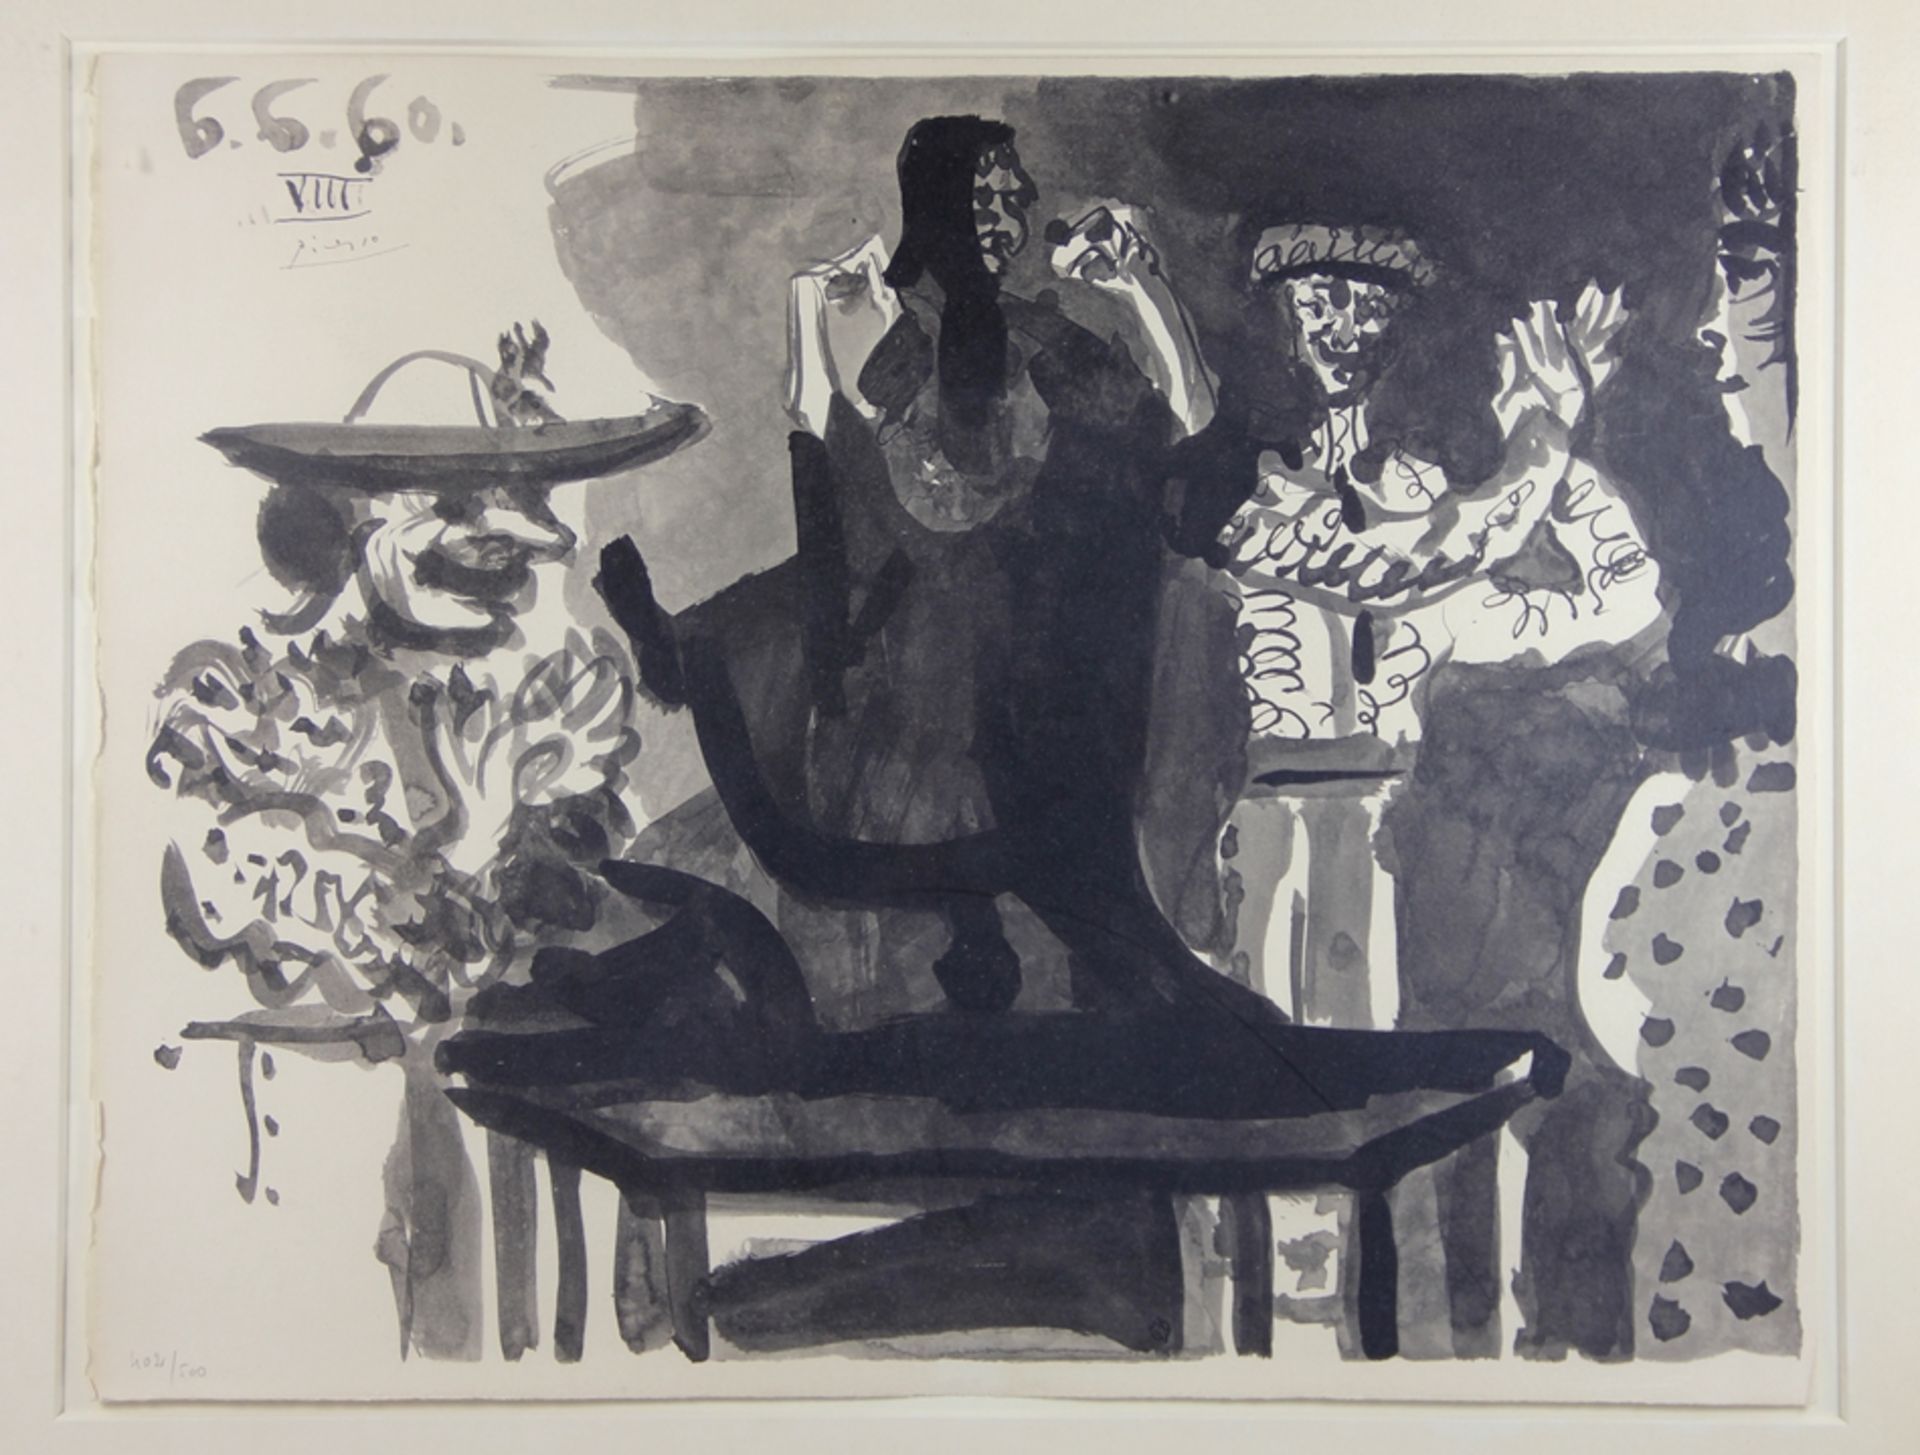 Picasso, Pablo - Image 2 of 4